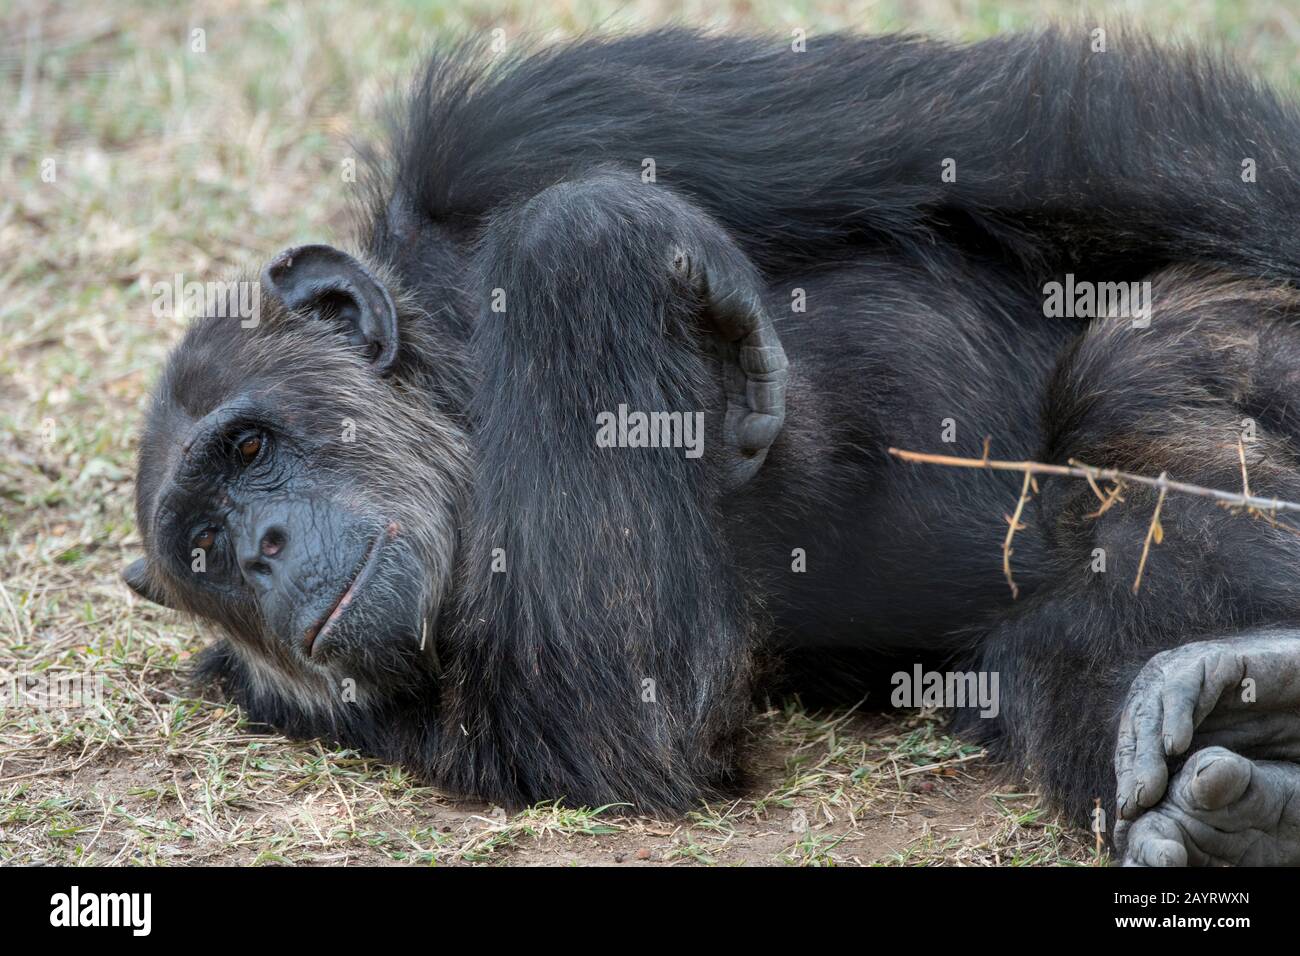 A Chimpanzee at the Sweetwaters Chimpanzee Sanctuary at Ol Pejeta Conservancy in Kenya. Stock Photo